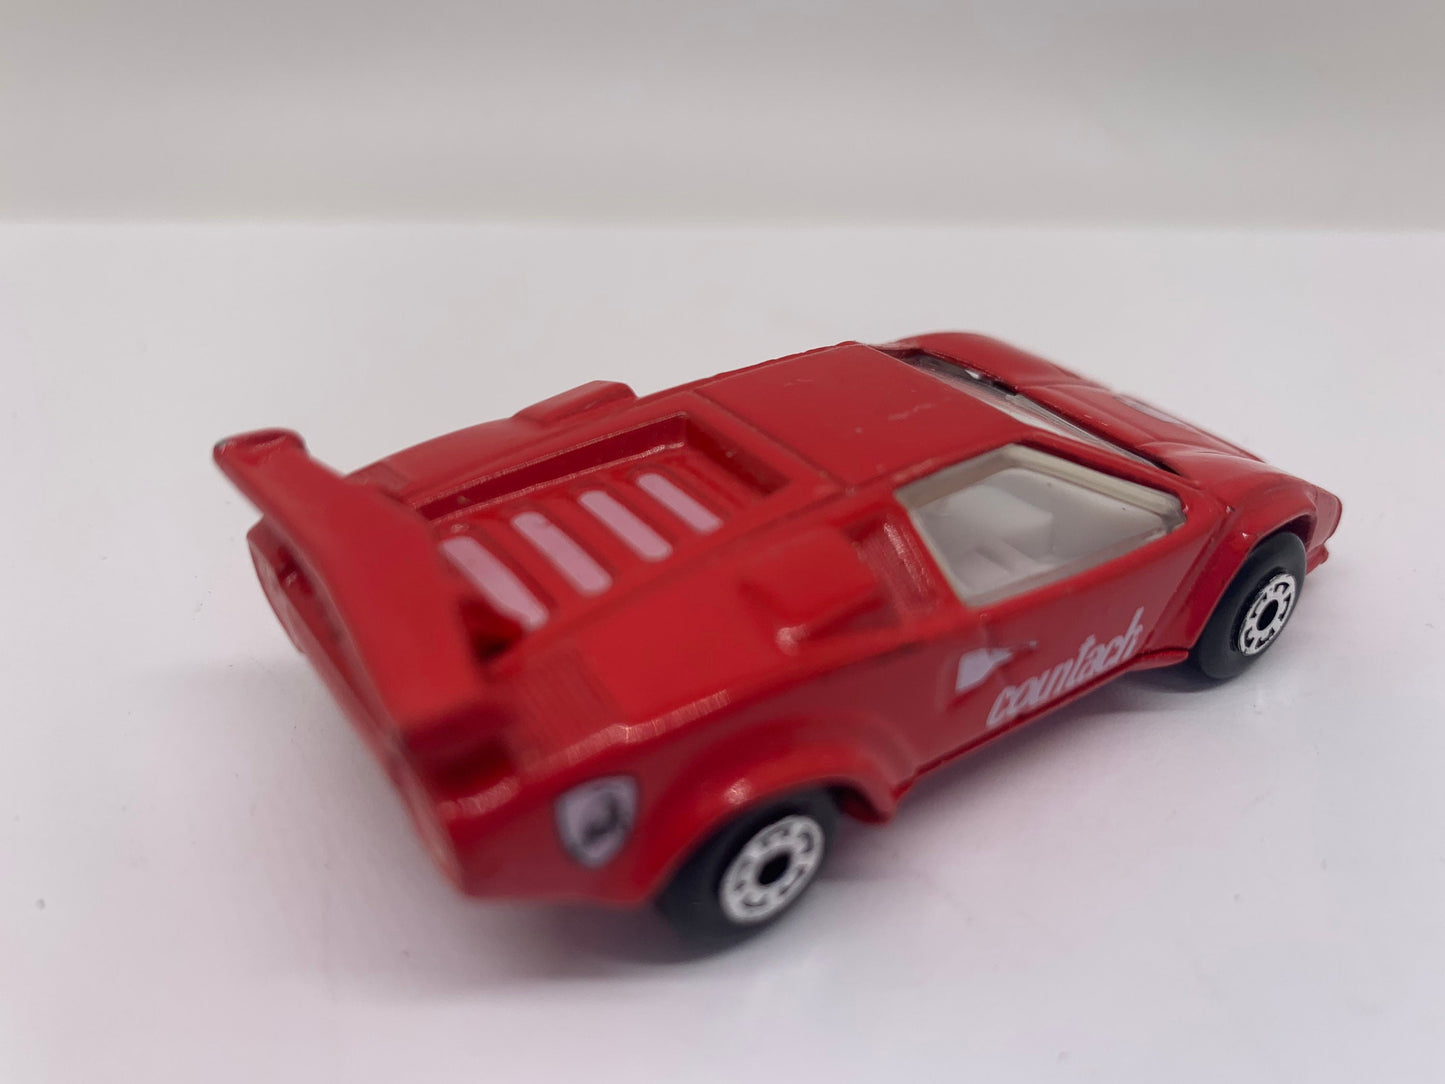 Matchbox Lamborghini Countach LP500S Red Perfect Birthday Gift Miniature Collectable Scale Model Toy Car